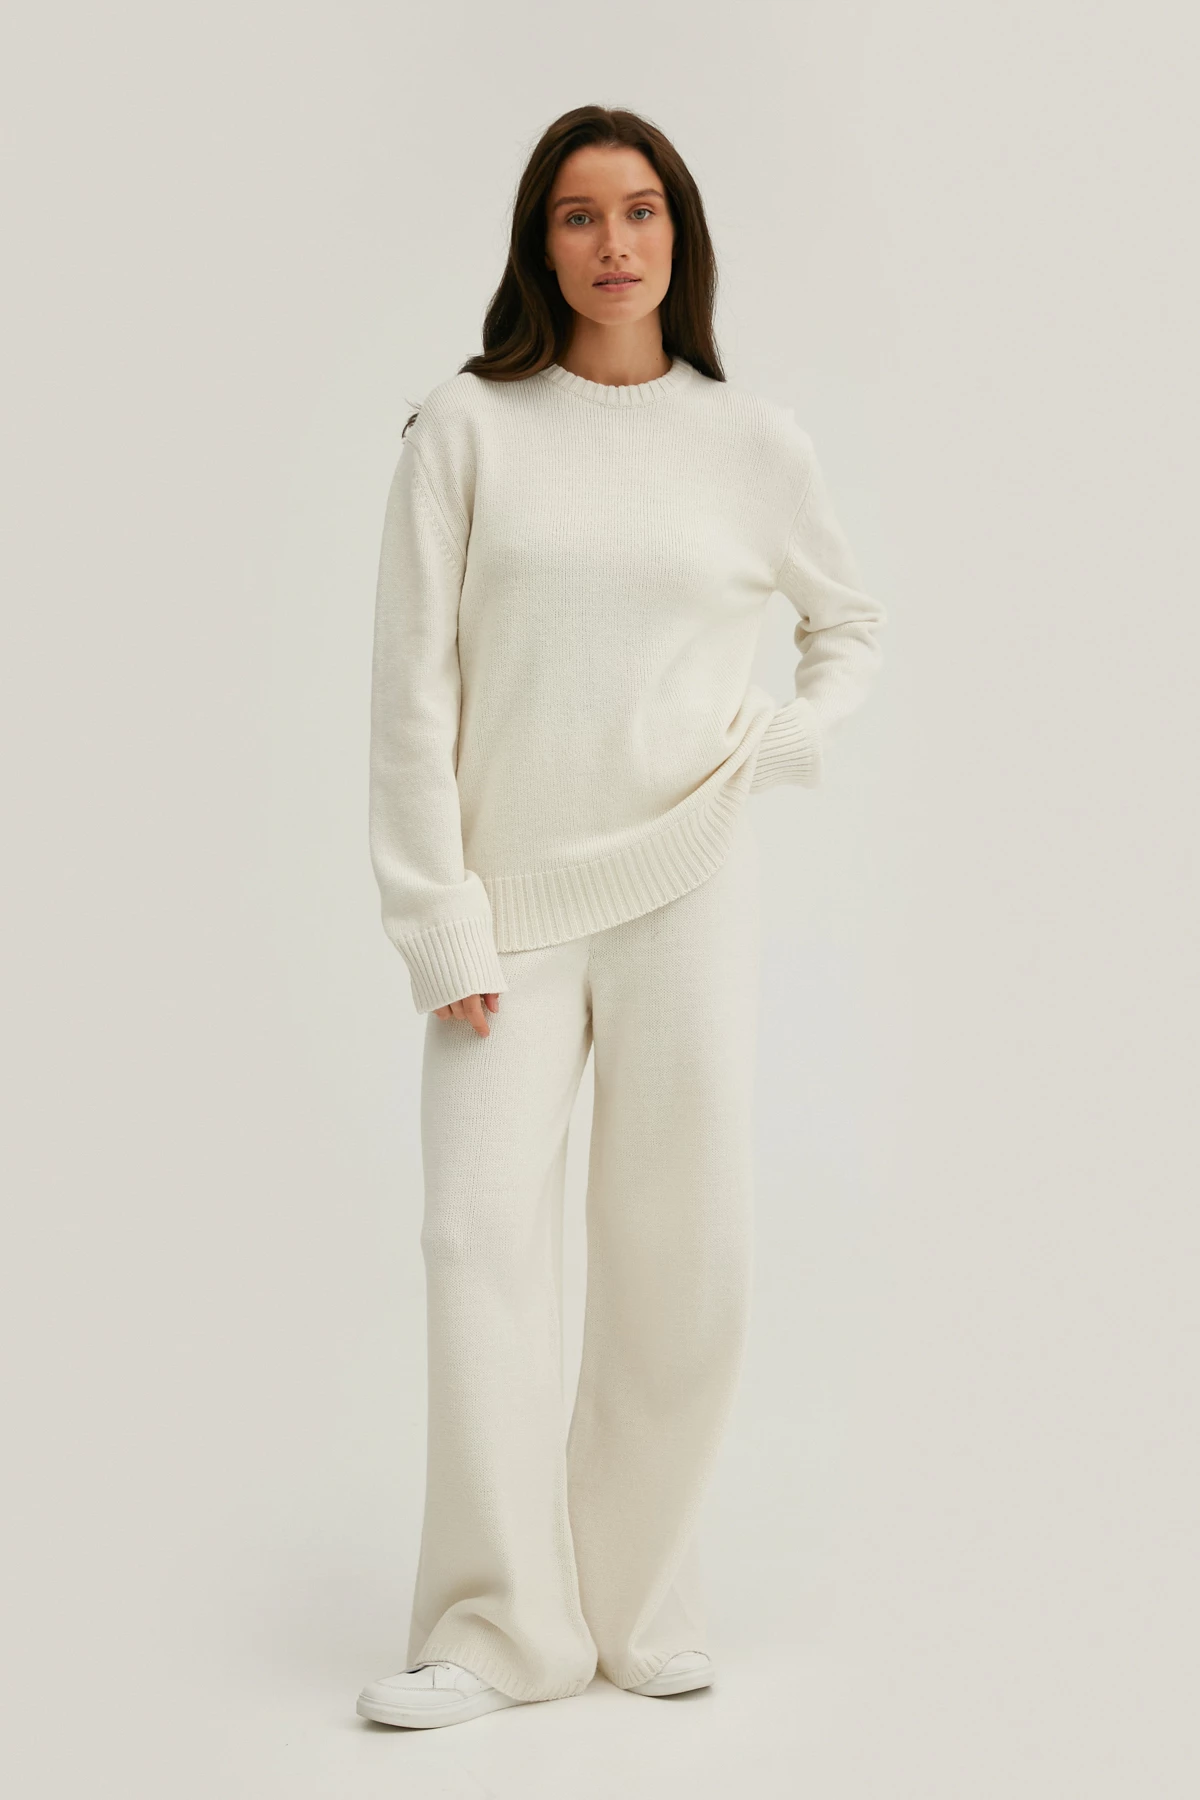 Milky knitted cropped pants with merino wool, photo 3